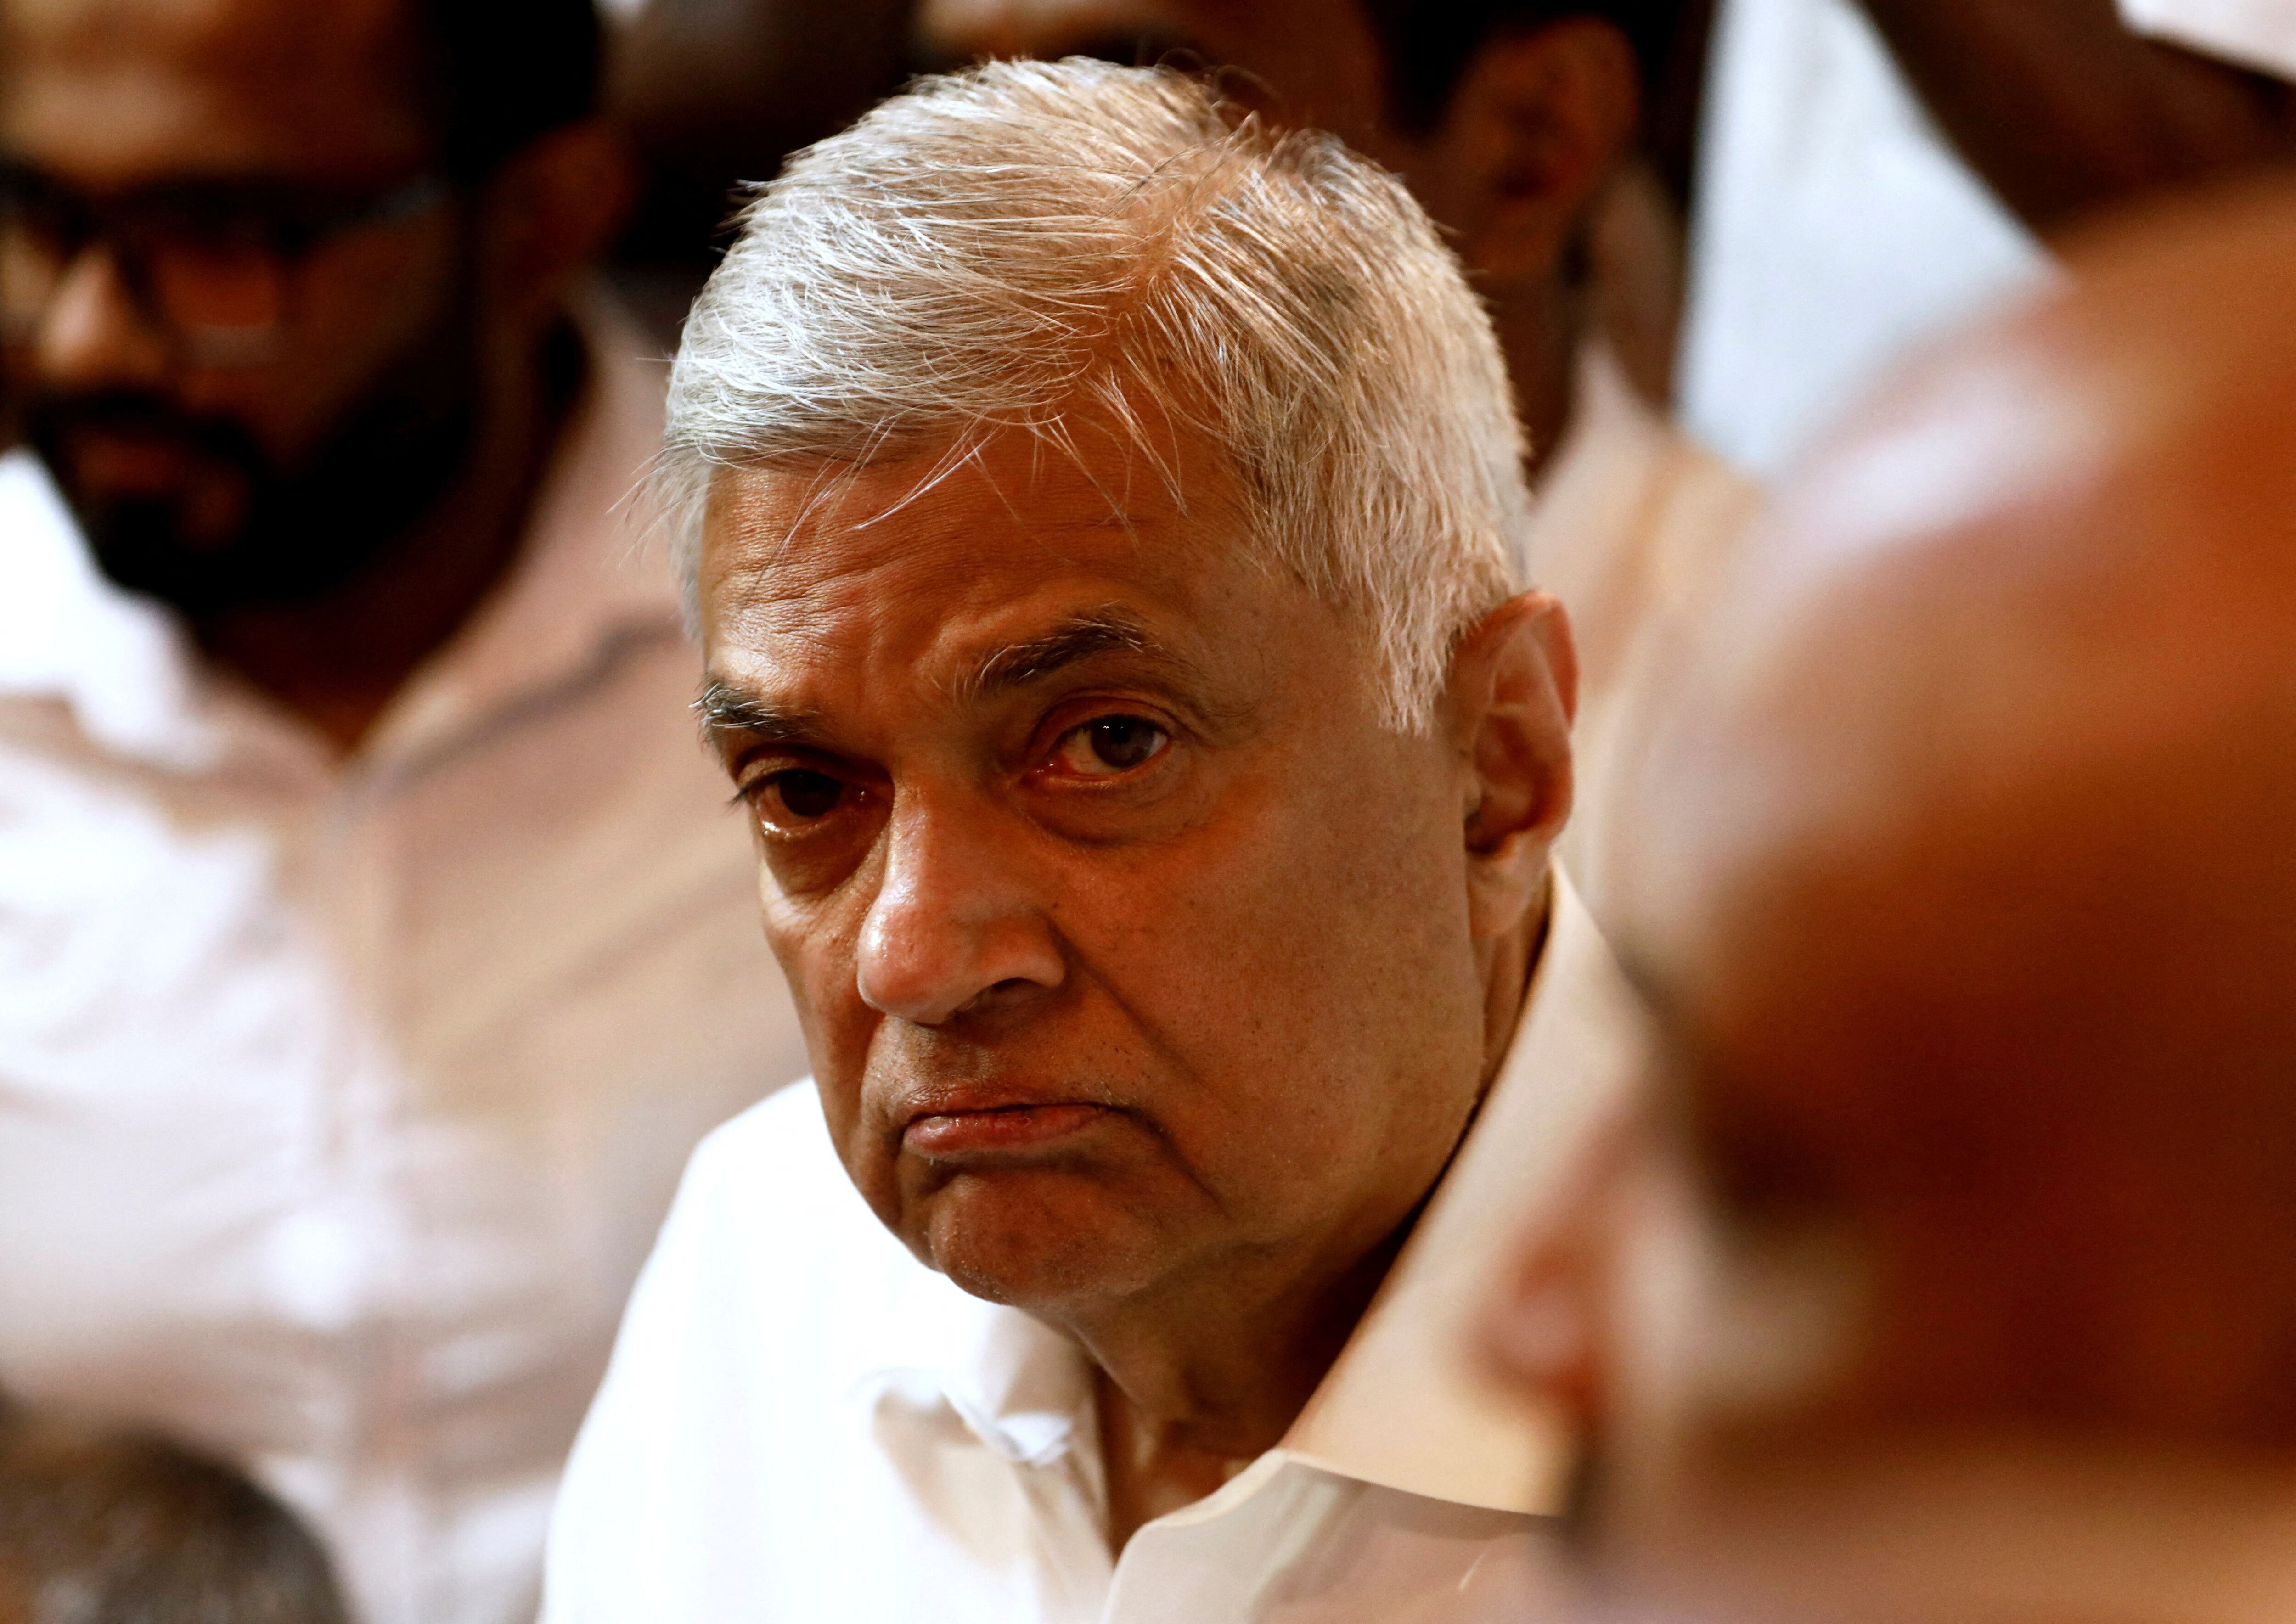 FILE PHOTO: Sri Lankan Prime Minister Ranil Wickremesinghe arrives at a Buddhist temple after his swearing-in ceremony amid the country's economic crisis, in Colombo, Sri Lanka, May 12, 2022. REUTERS/Dinuka Liyanawatte/File Photo/File Photo